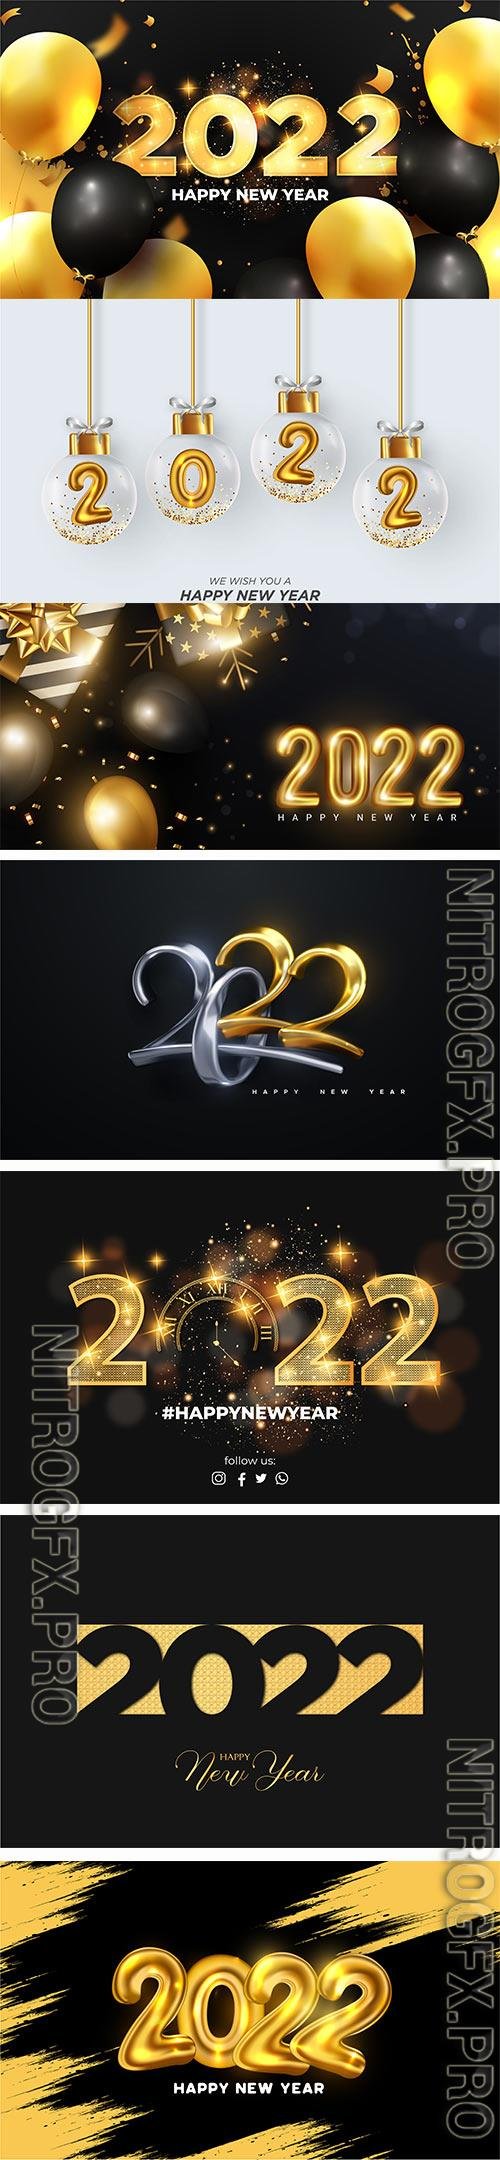 2022 number made by sparkle lights with golden swirl ribbons on black background for happy new year concept